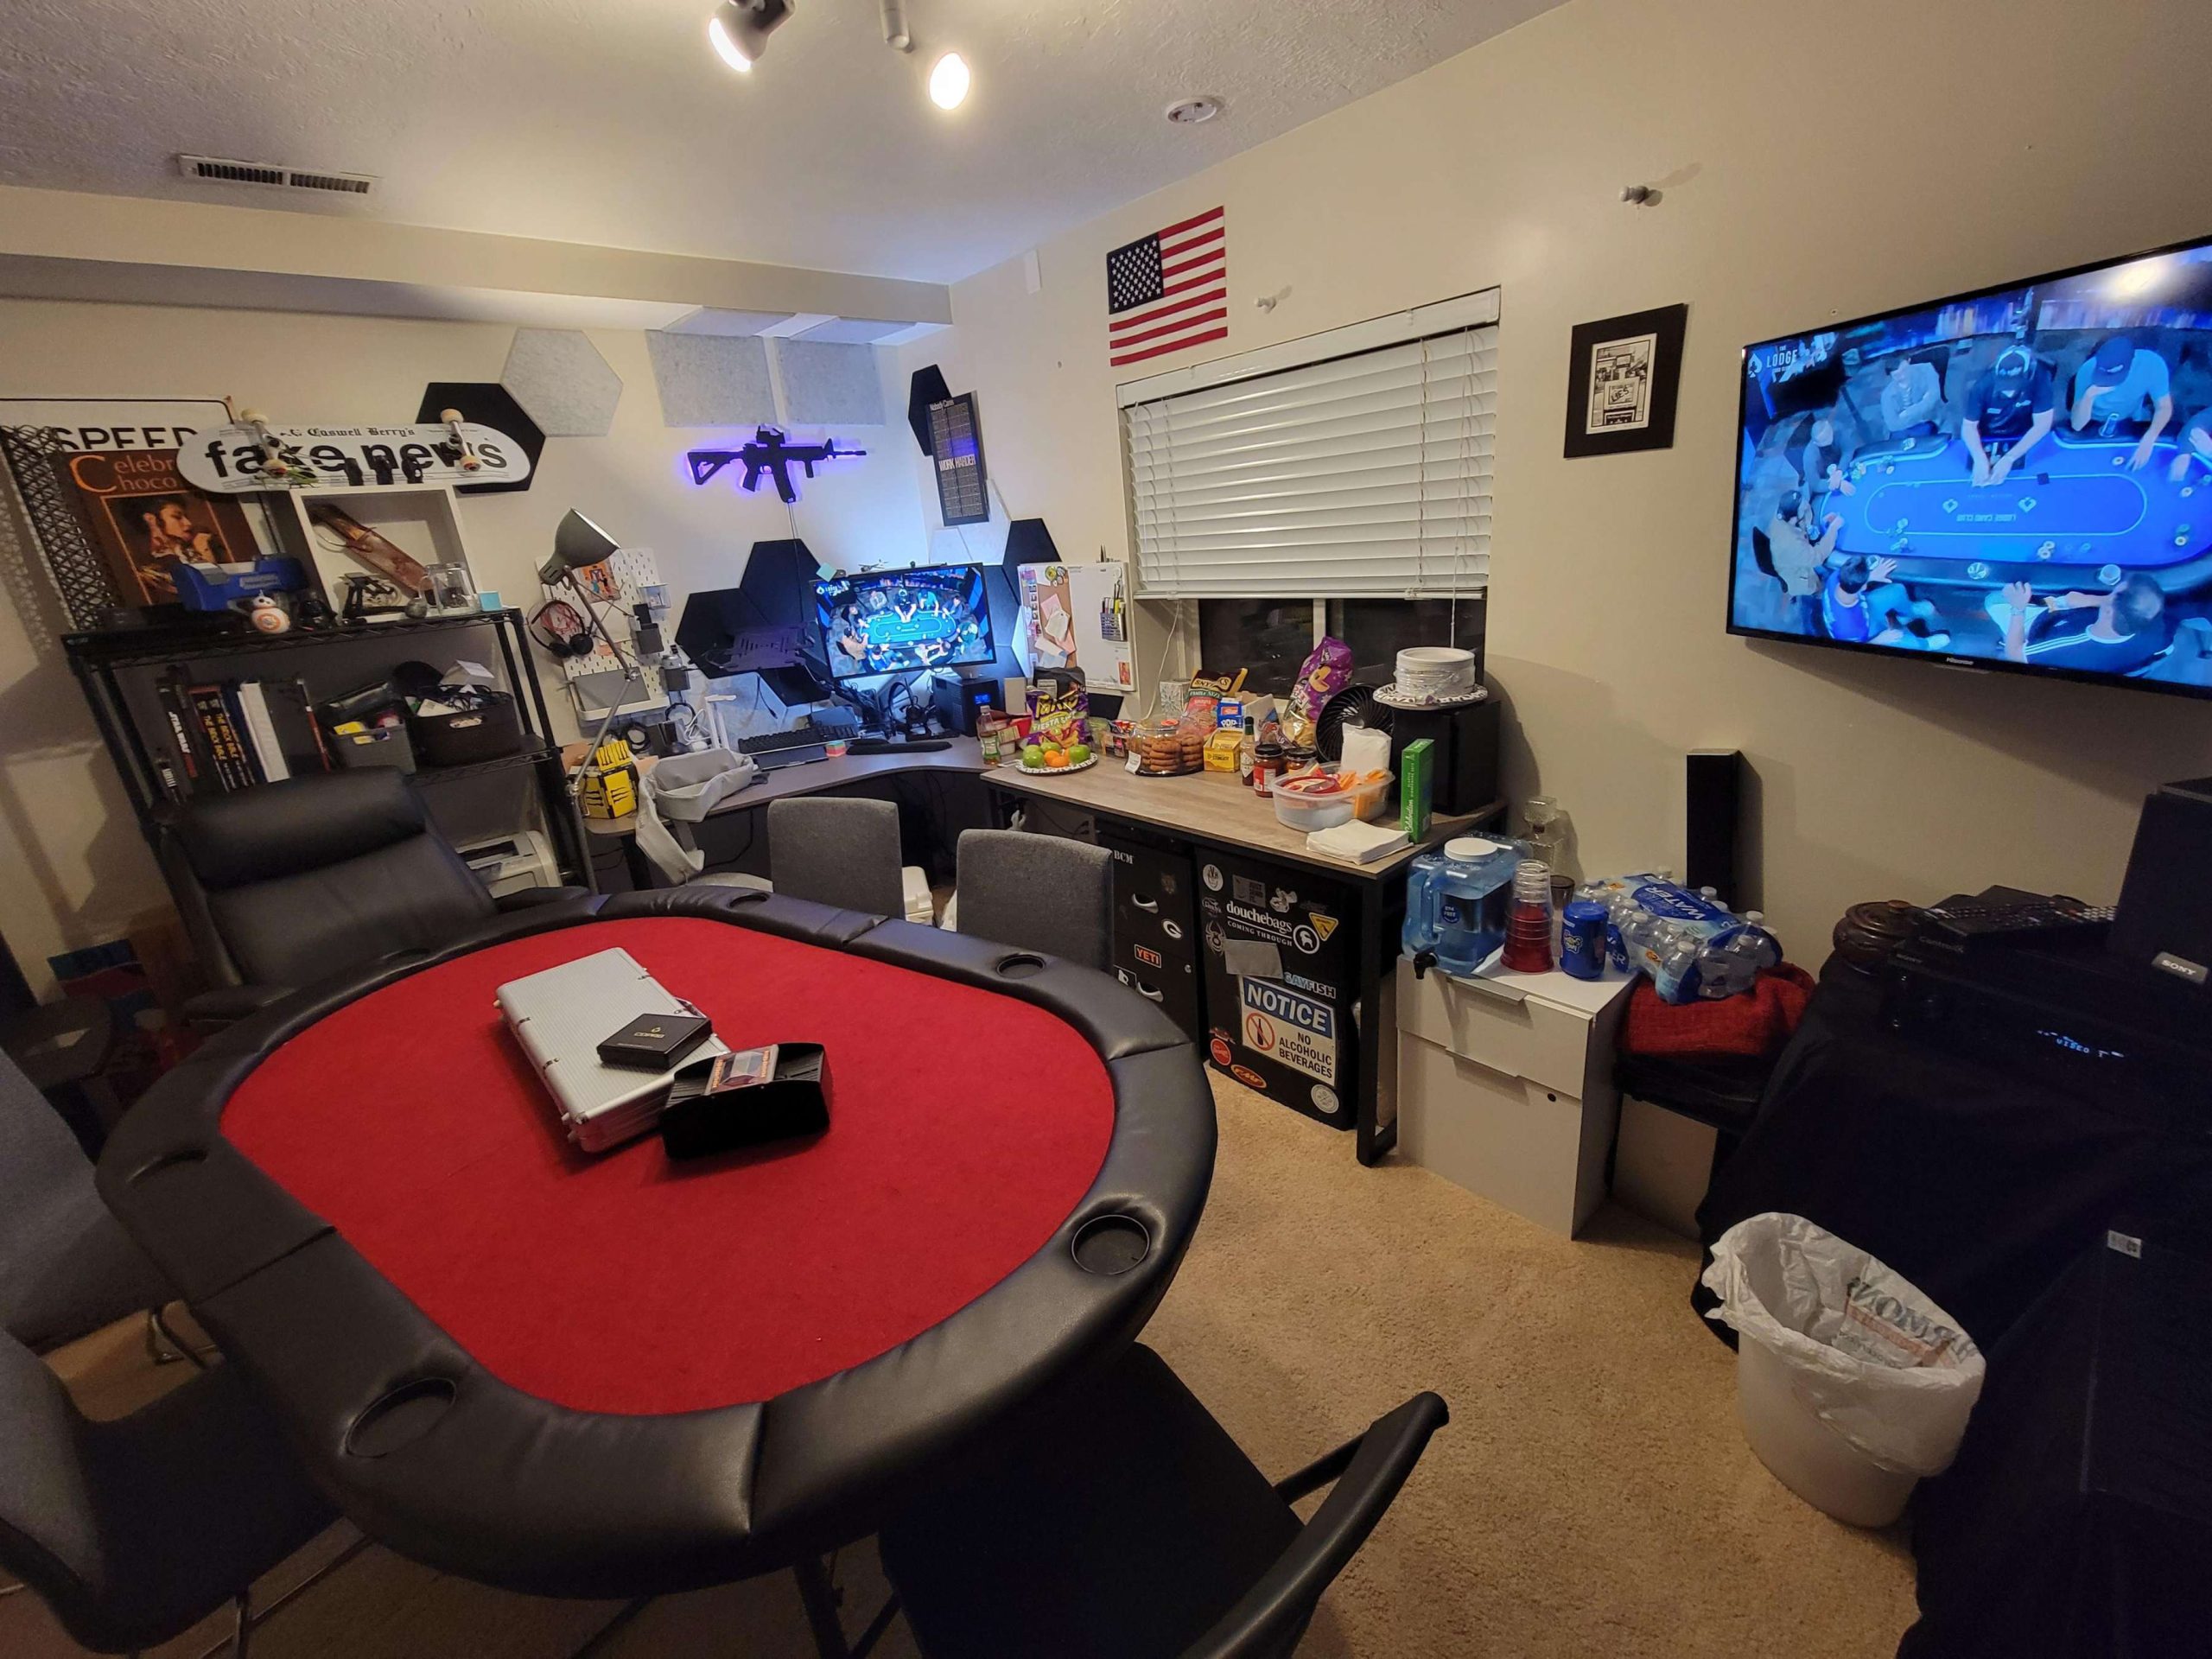 Home office converted to poker room for tonight : r/poker